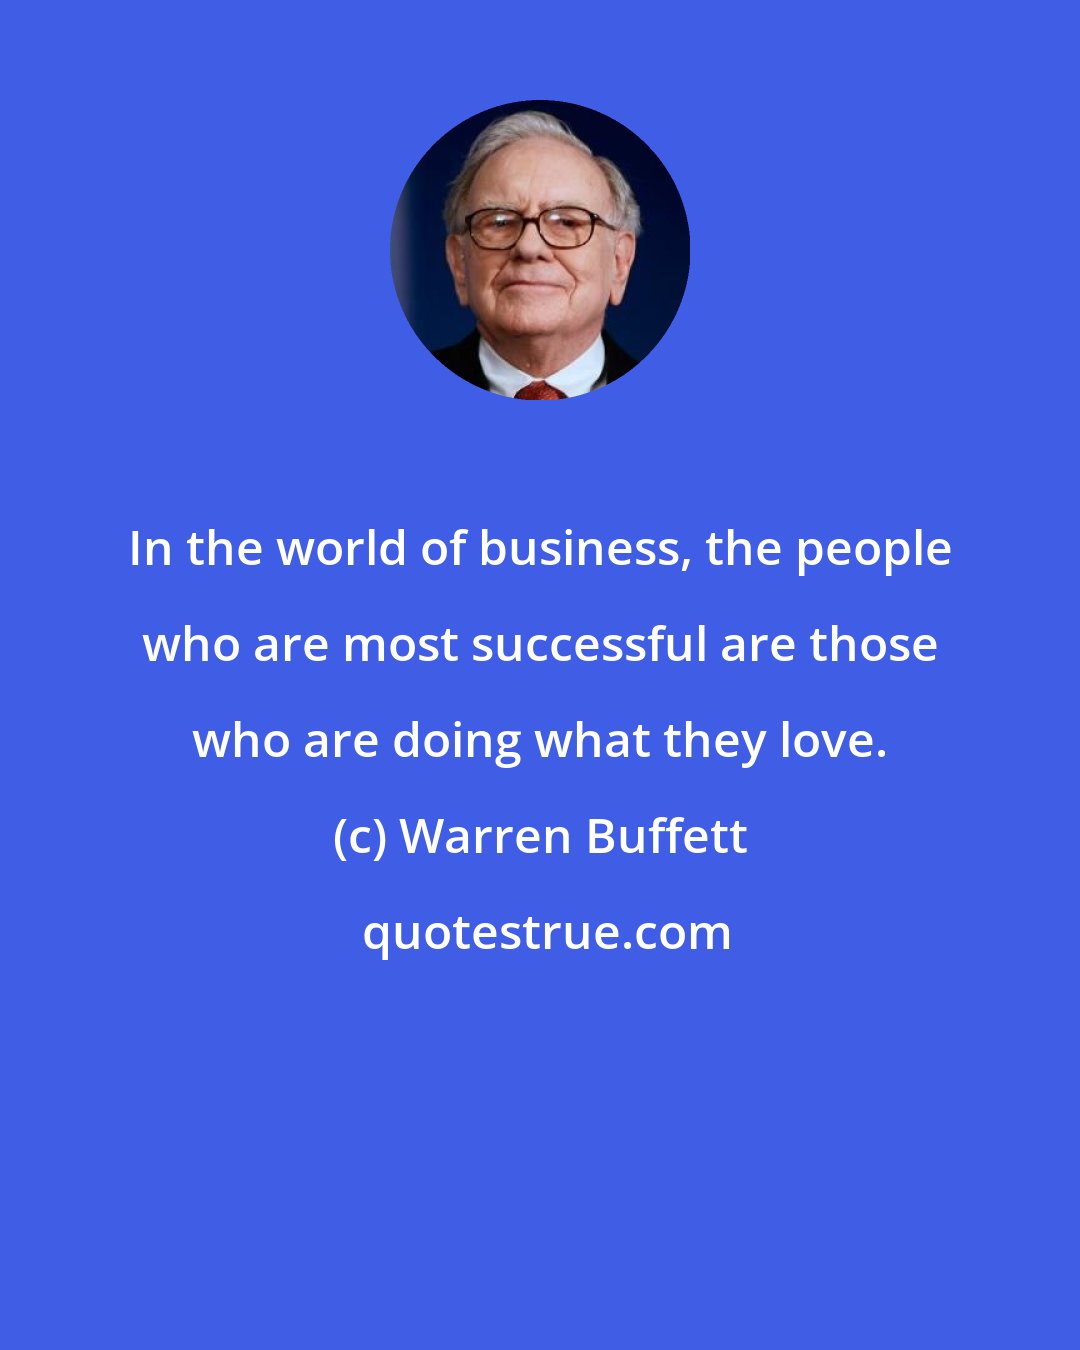 Warren Buffett: In the world of business, the people who are most successful are those who are doing what they love.